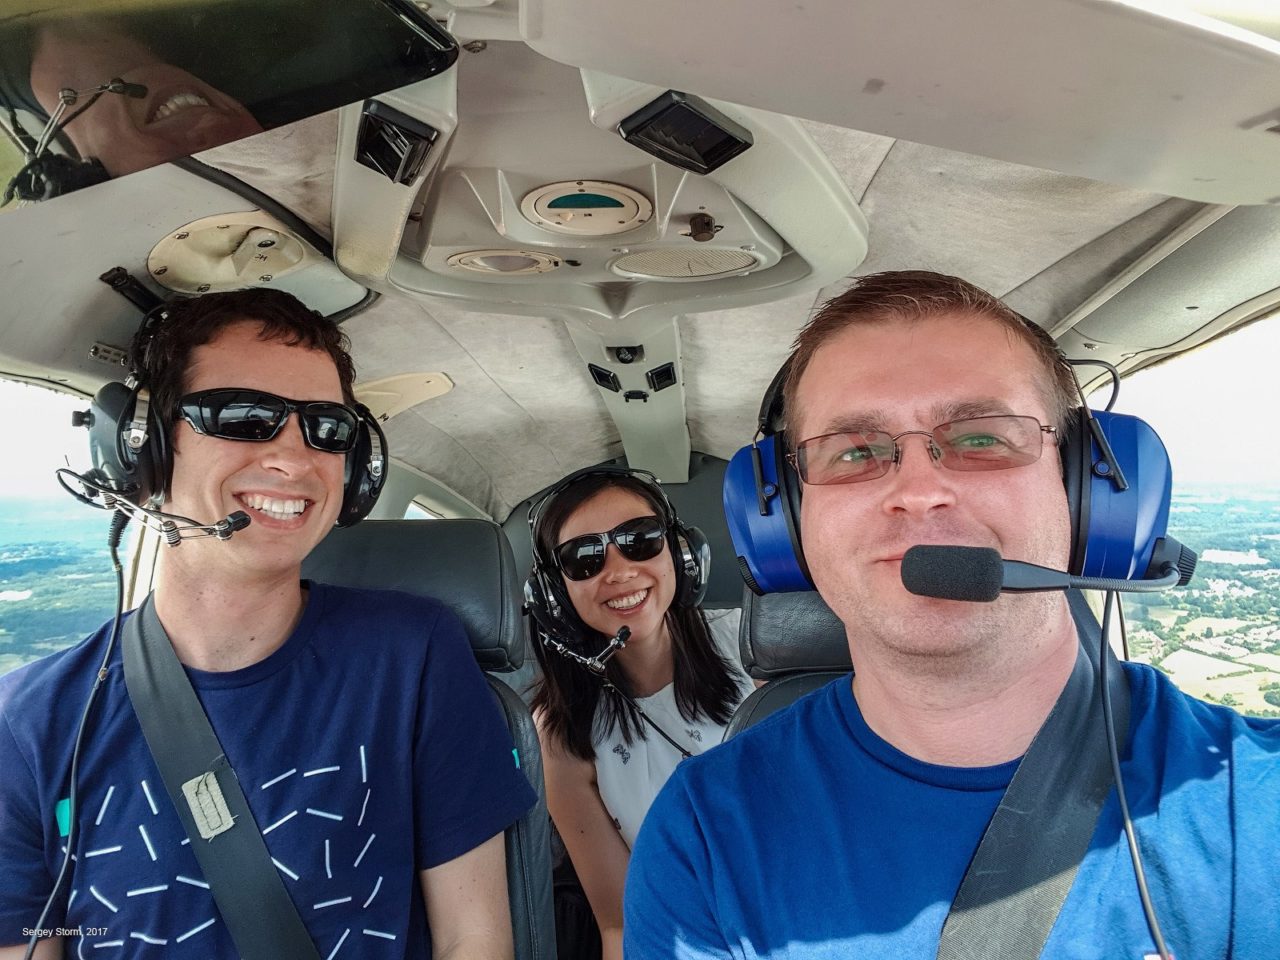 Selfie of a great flying experience